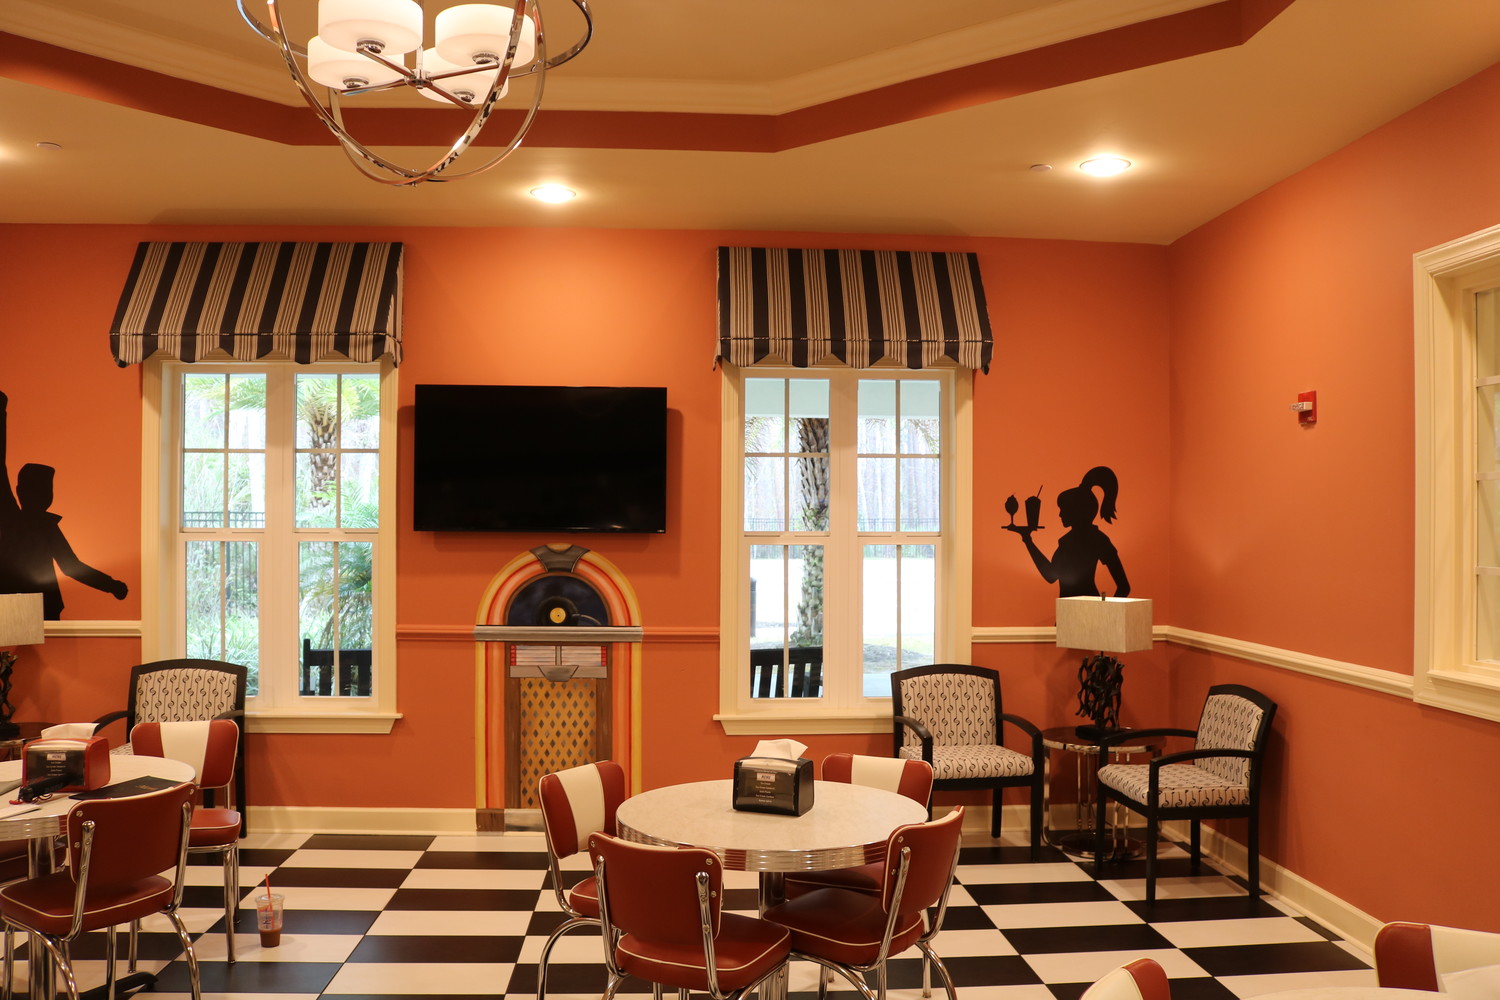 A restaurant-style dining area for residents at The Palms at Ponte Vedra